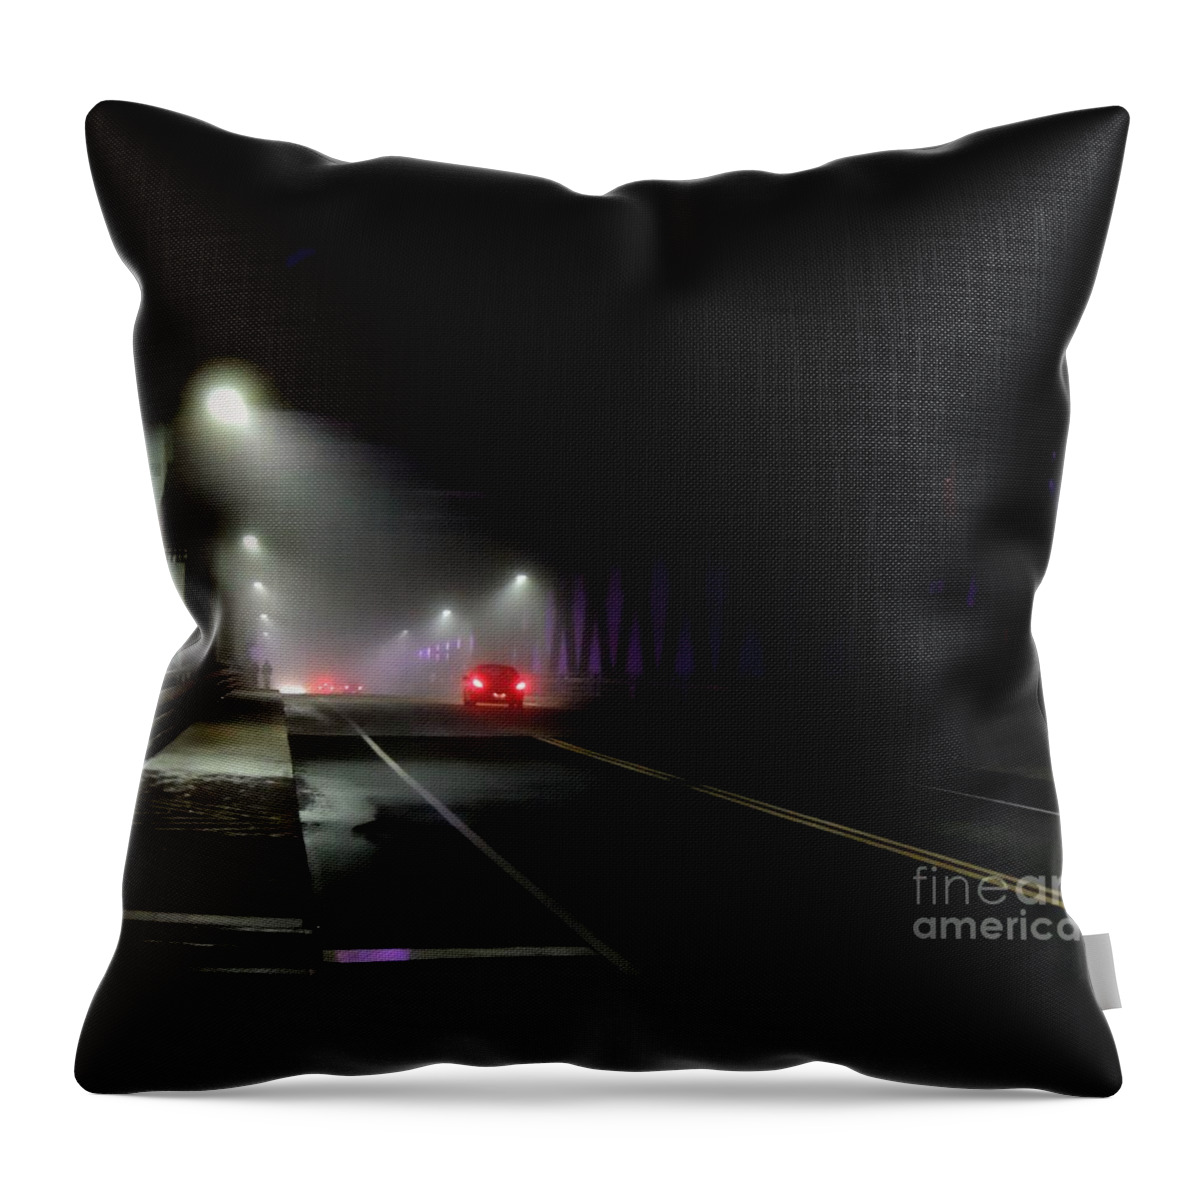  Night Throw Pillow featuring the photograph Bridge Crossing by Marcia Lee Jones